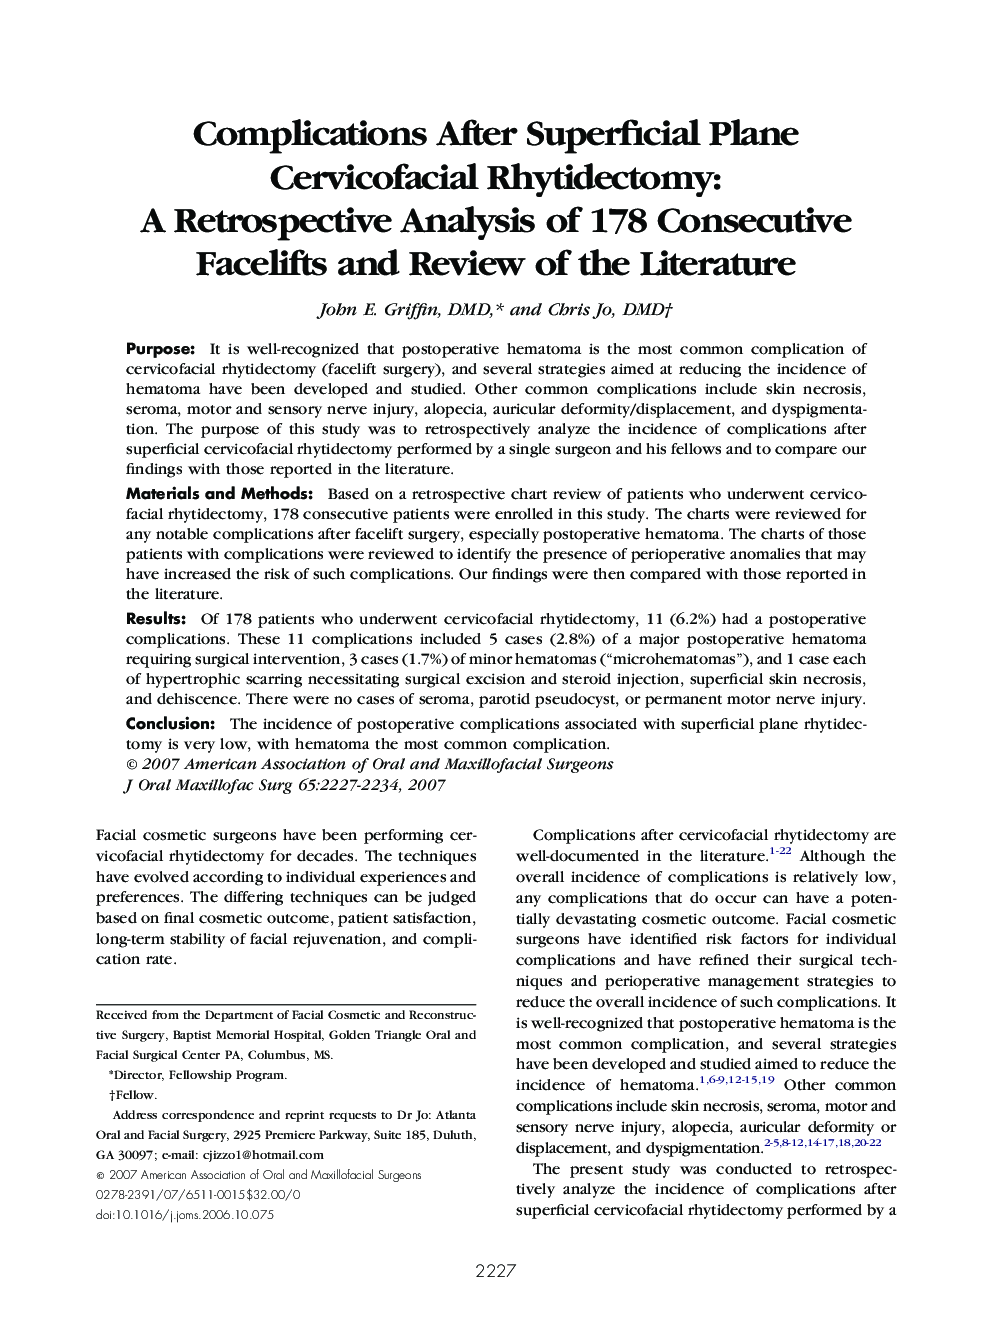 Complications After Superficial Plane Cervicofacial Rhytidectomy: A Retrospective Analysis of 178 Consecutive Facelifts and Review of the Literature